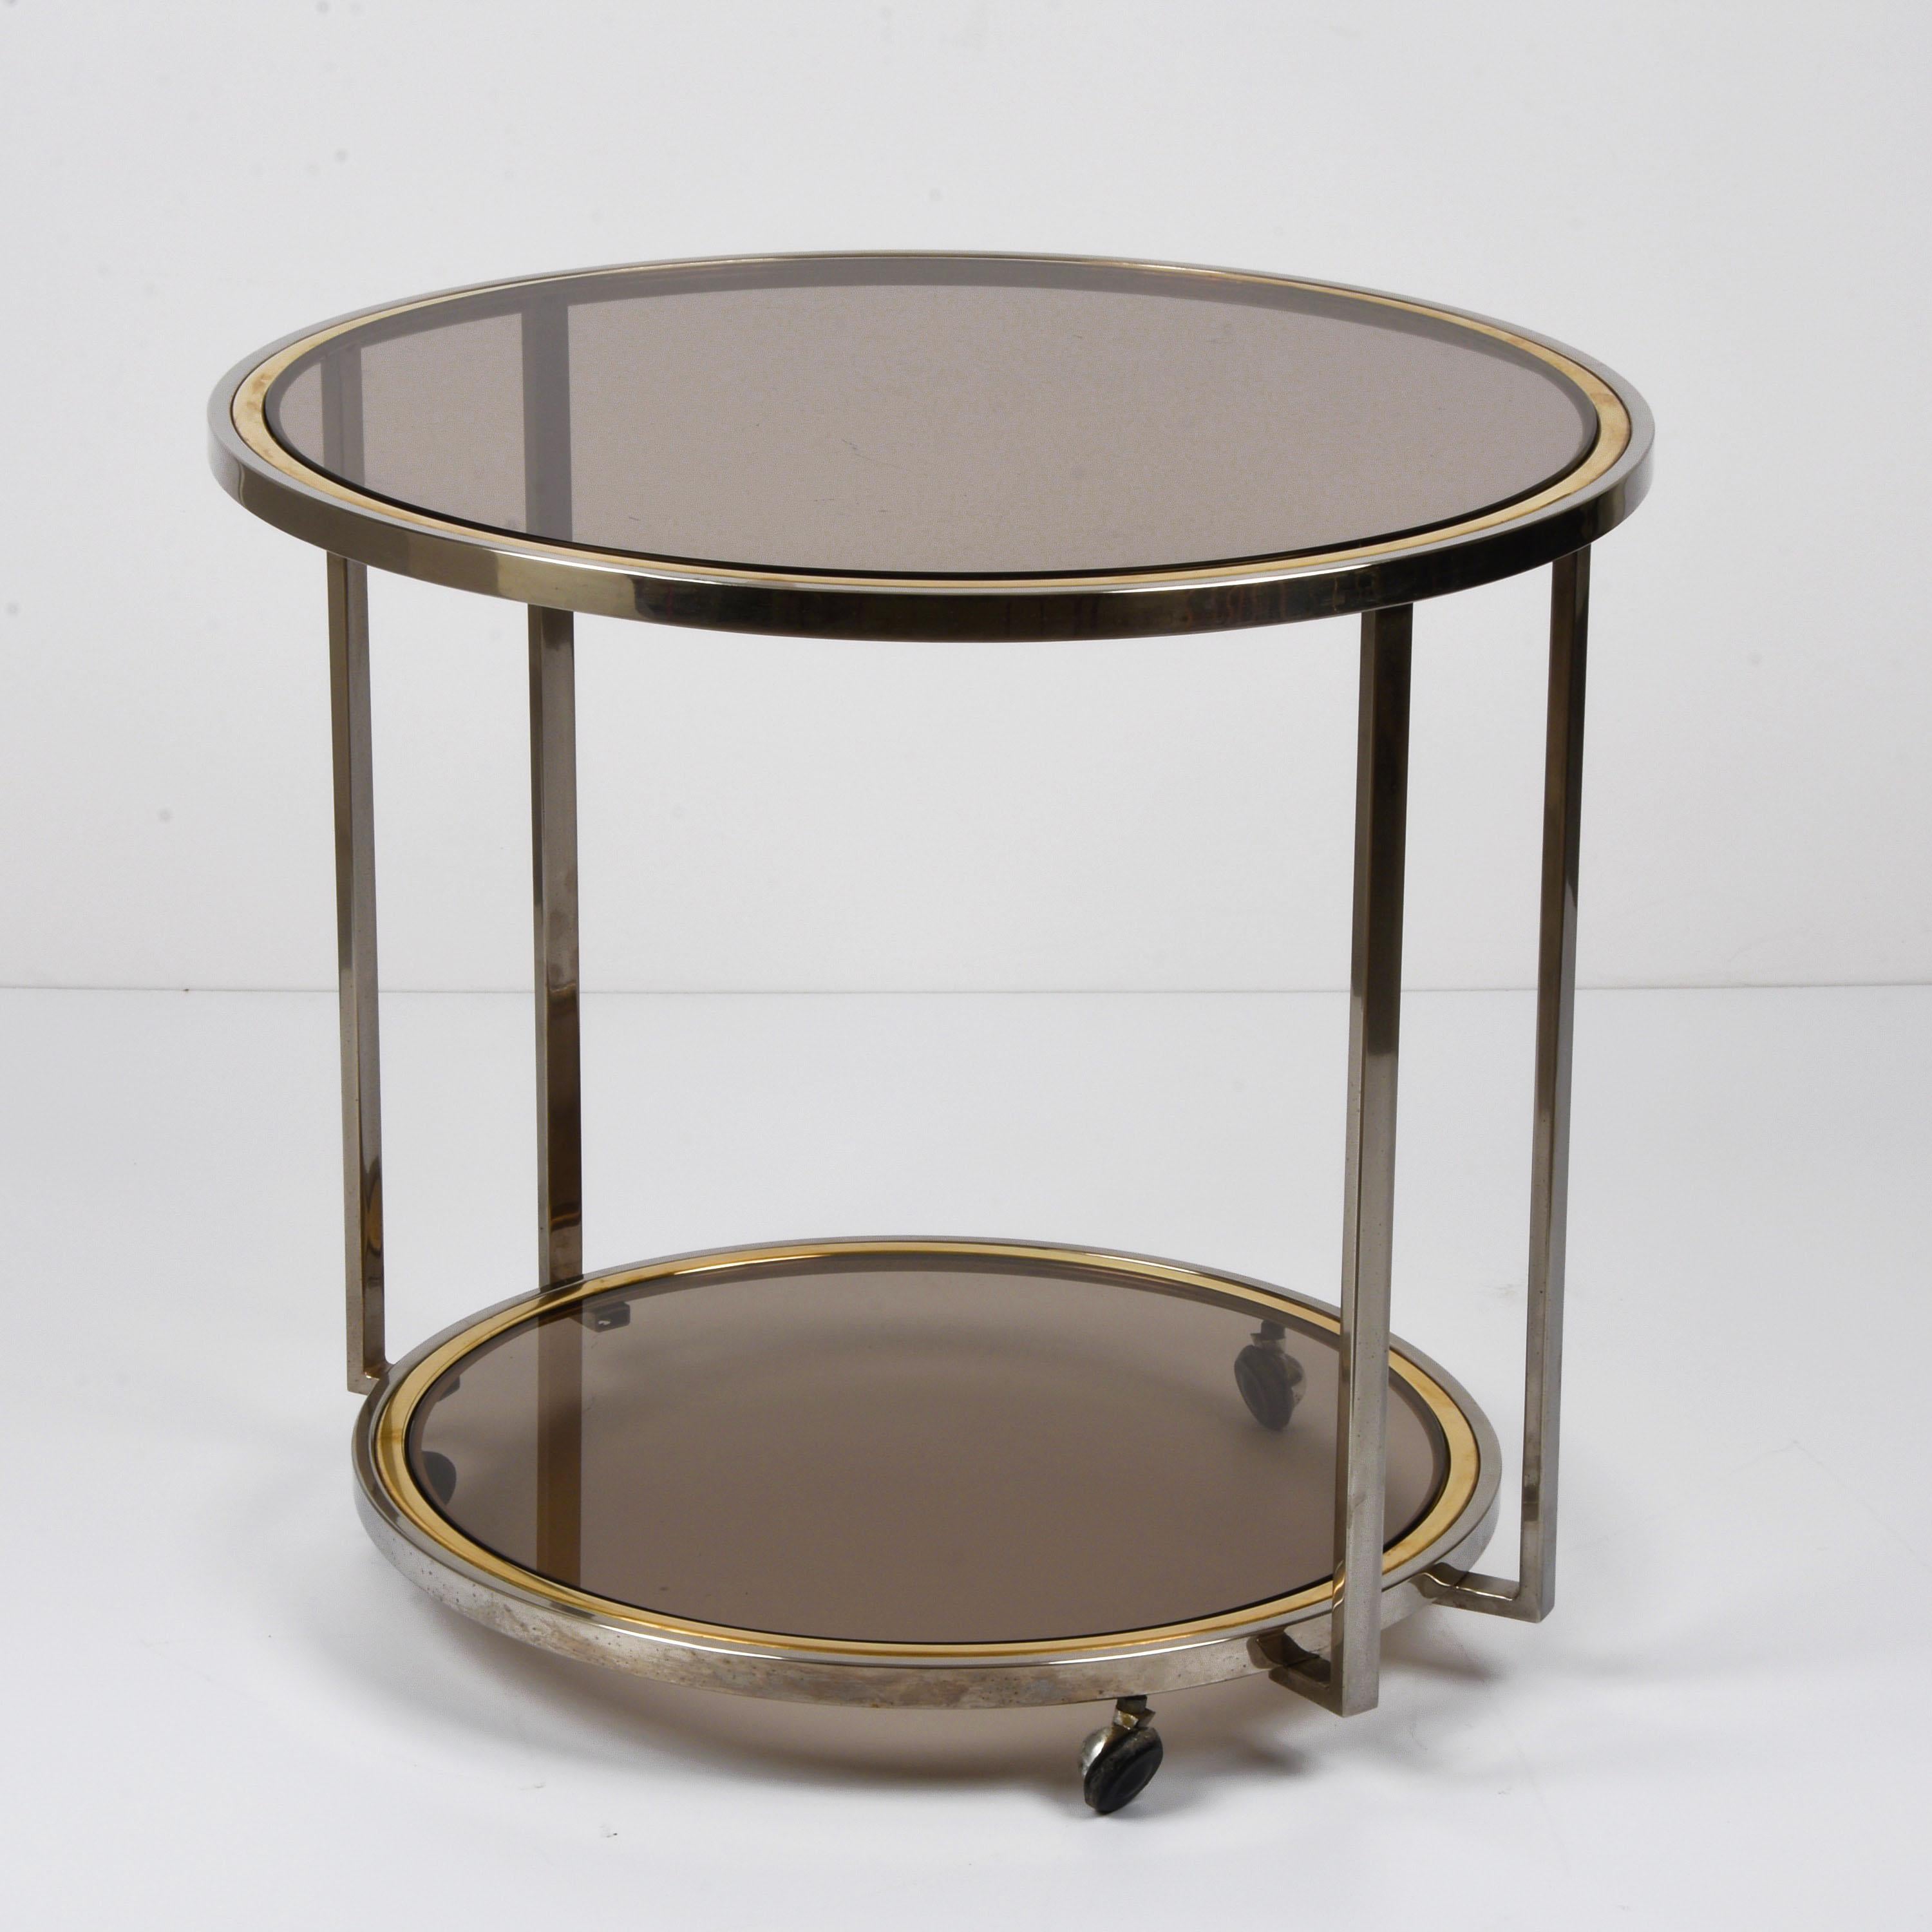 Late 20th Century Midcentury Brass and Chrome and Glass Italian Coffee Table after Romeo Rega 1970 For Sale